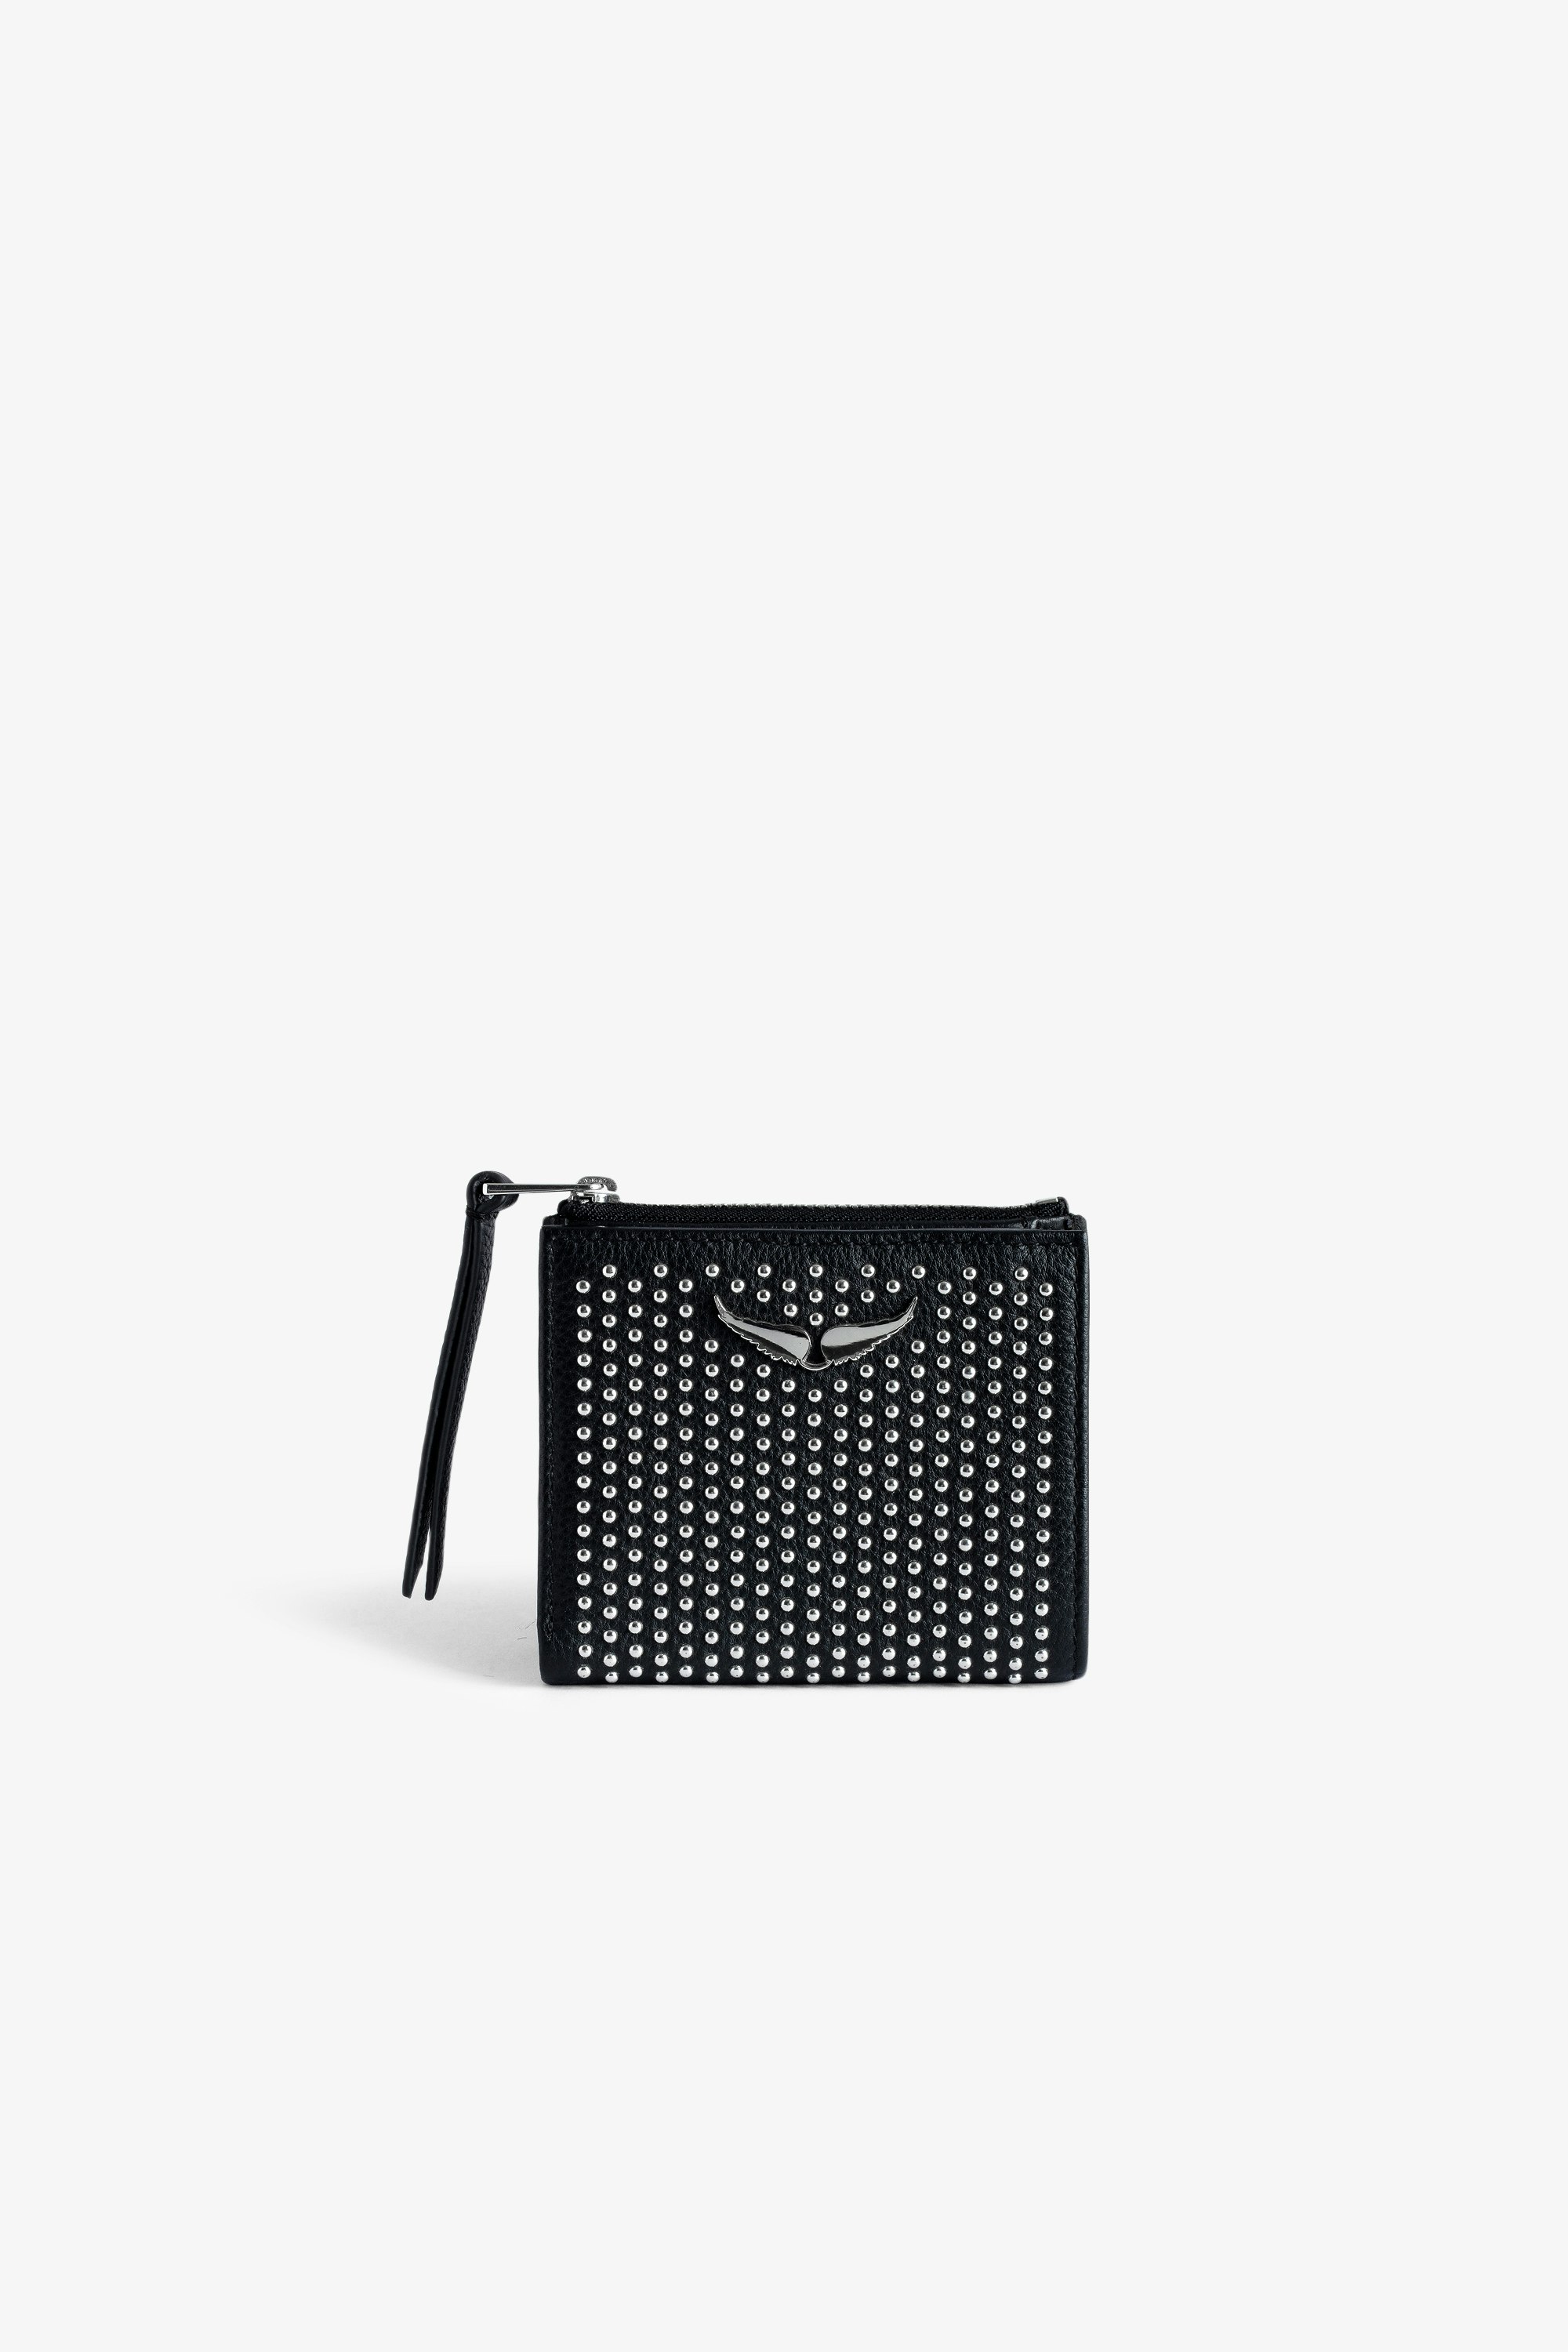 ZV Fold Dotted Swiss Coin Purse Women’s black grained leather coin purse with studs and wings charm.